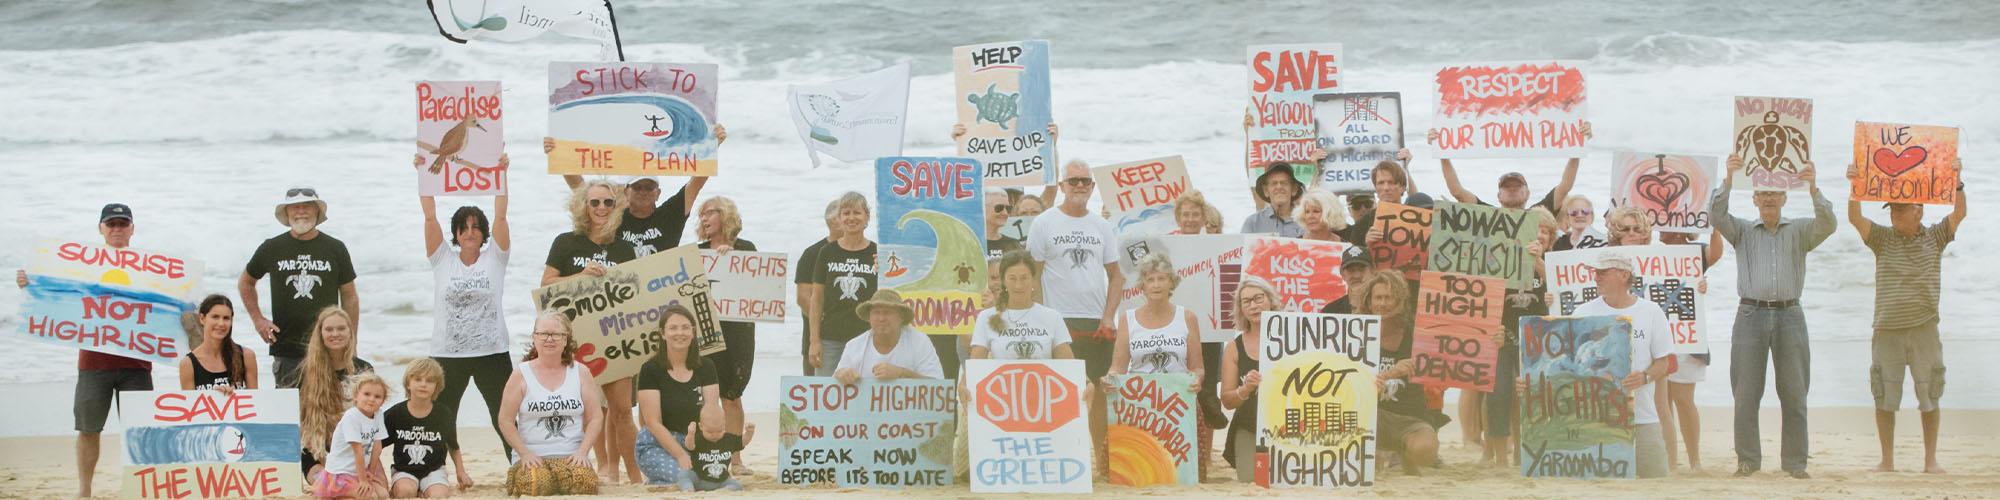 group of people holding signs on beach